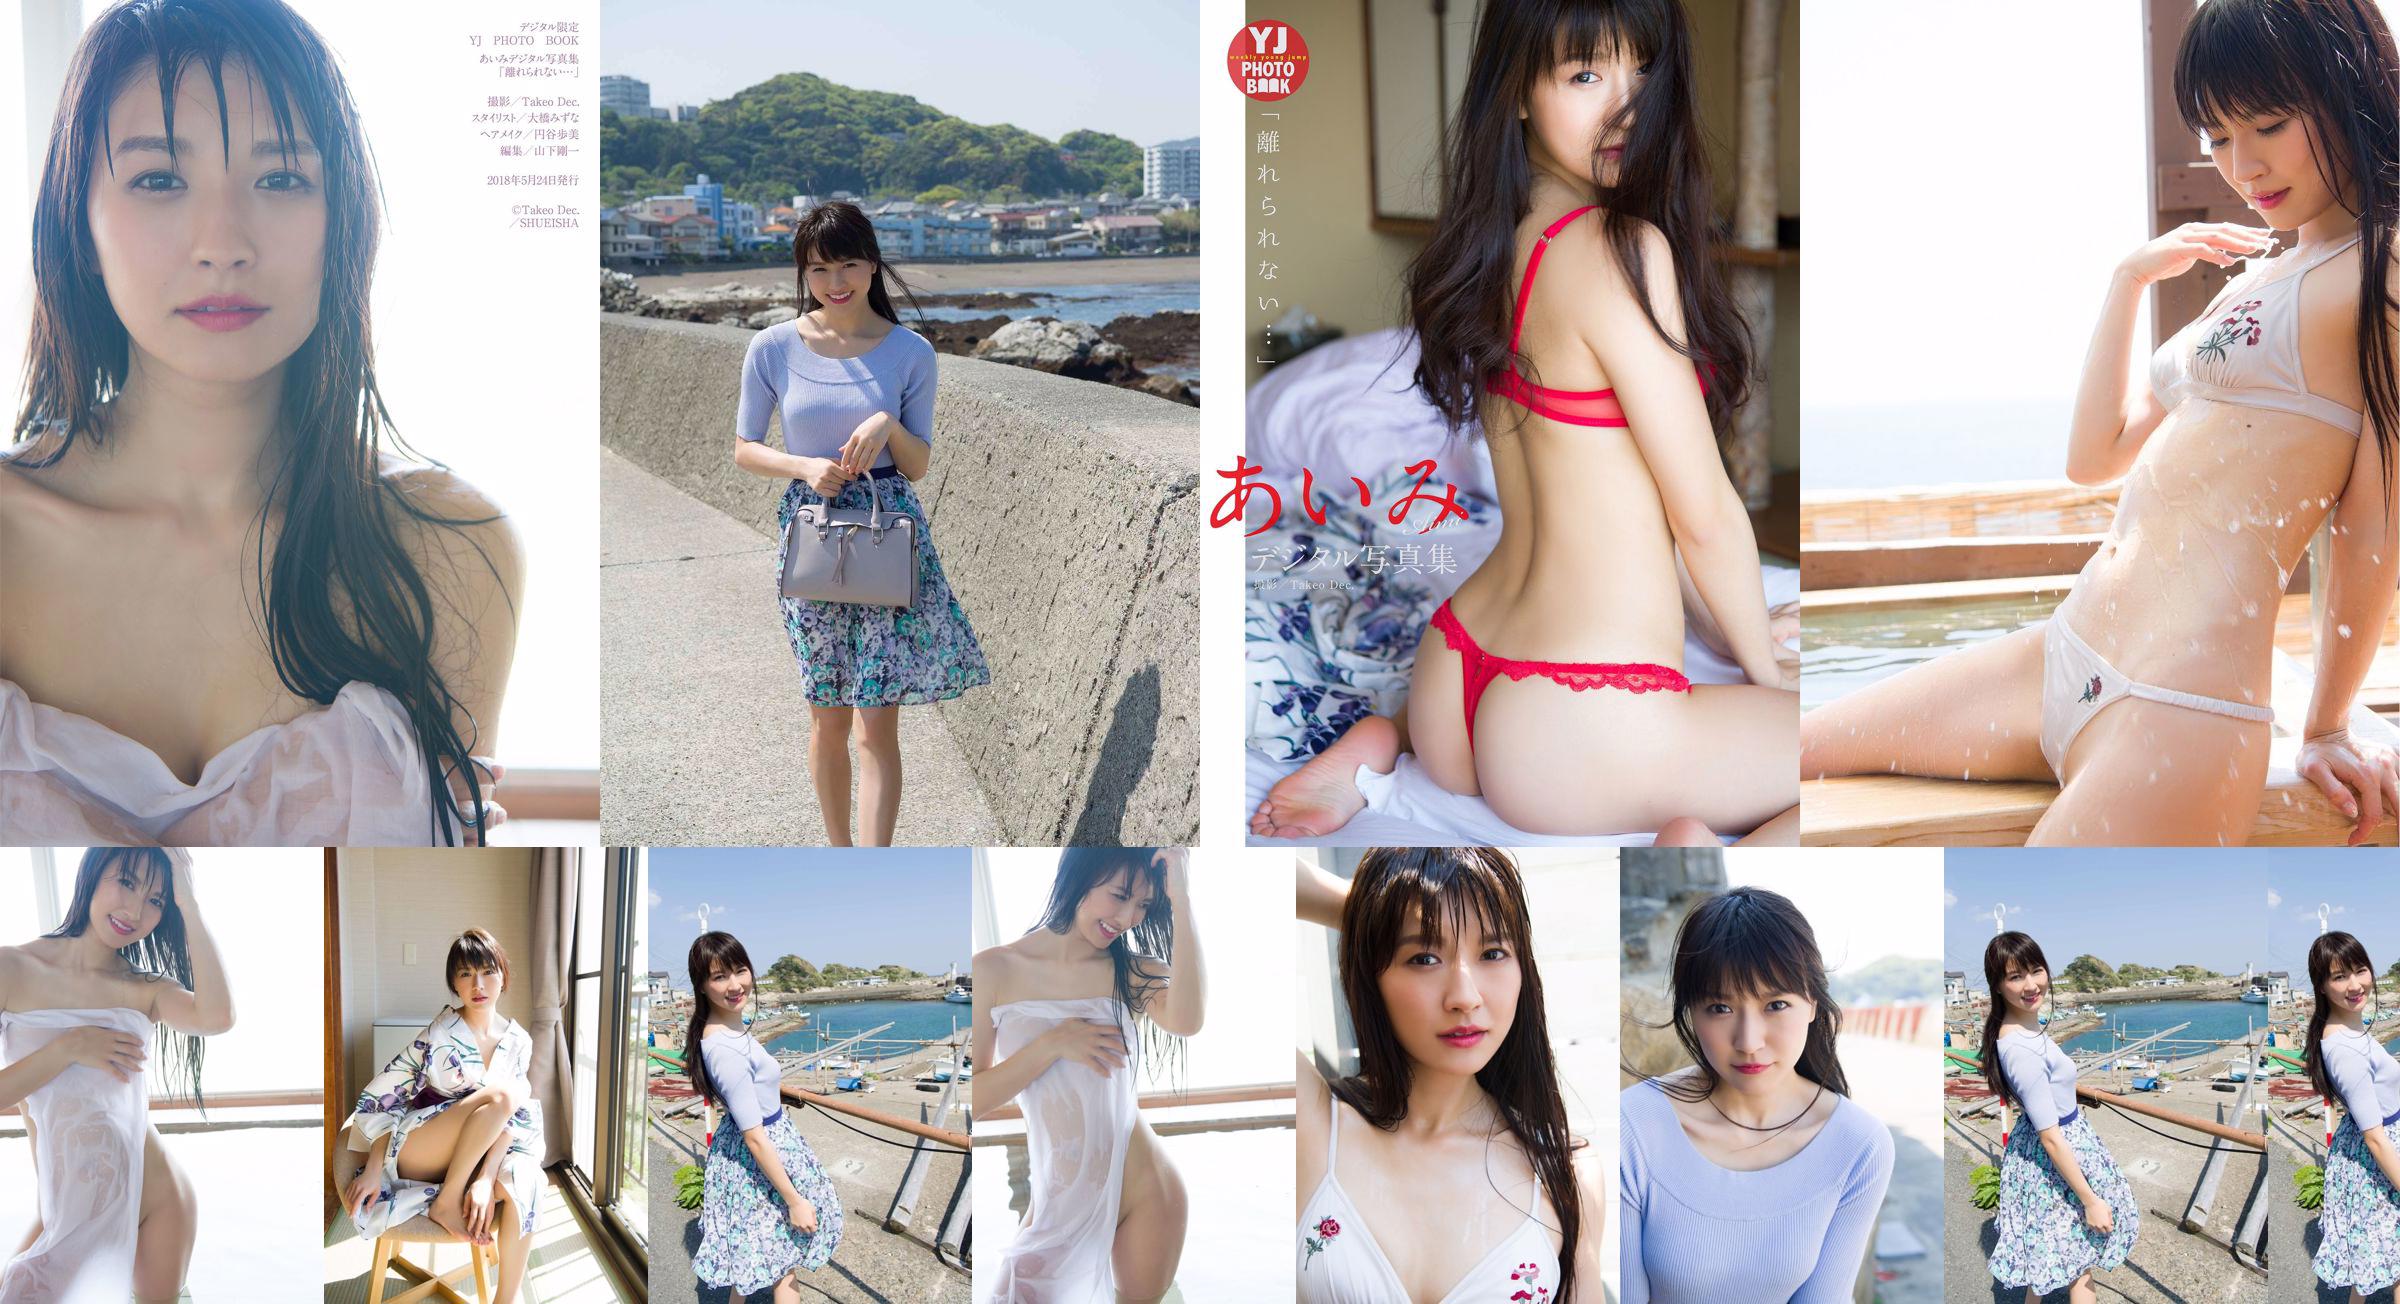 Aimi Nakano "I can't leave ..." [Digital Limited YJ PHOTO BOOK] No.7acde6 Page 15